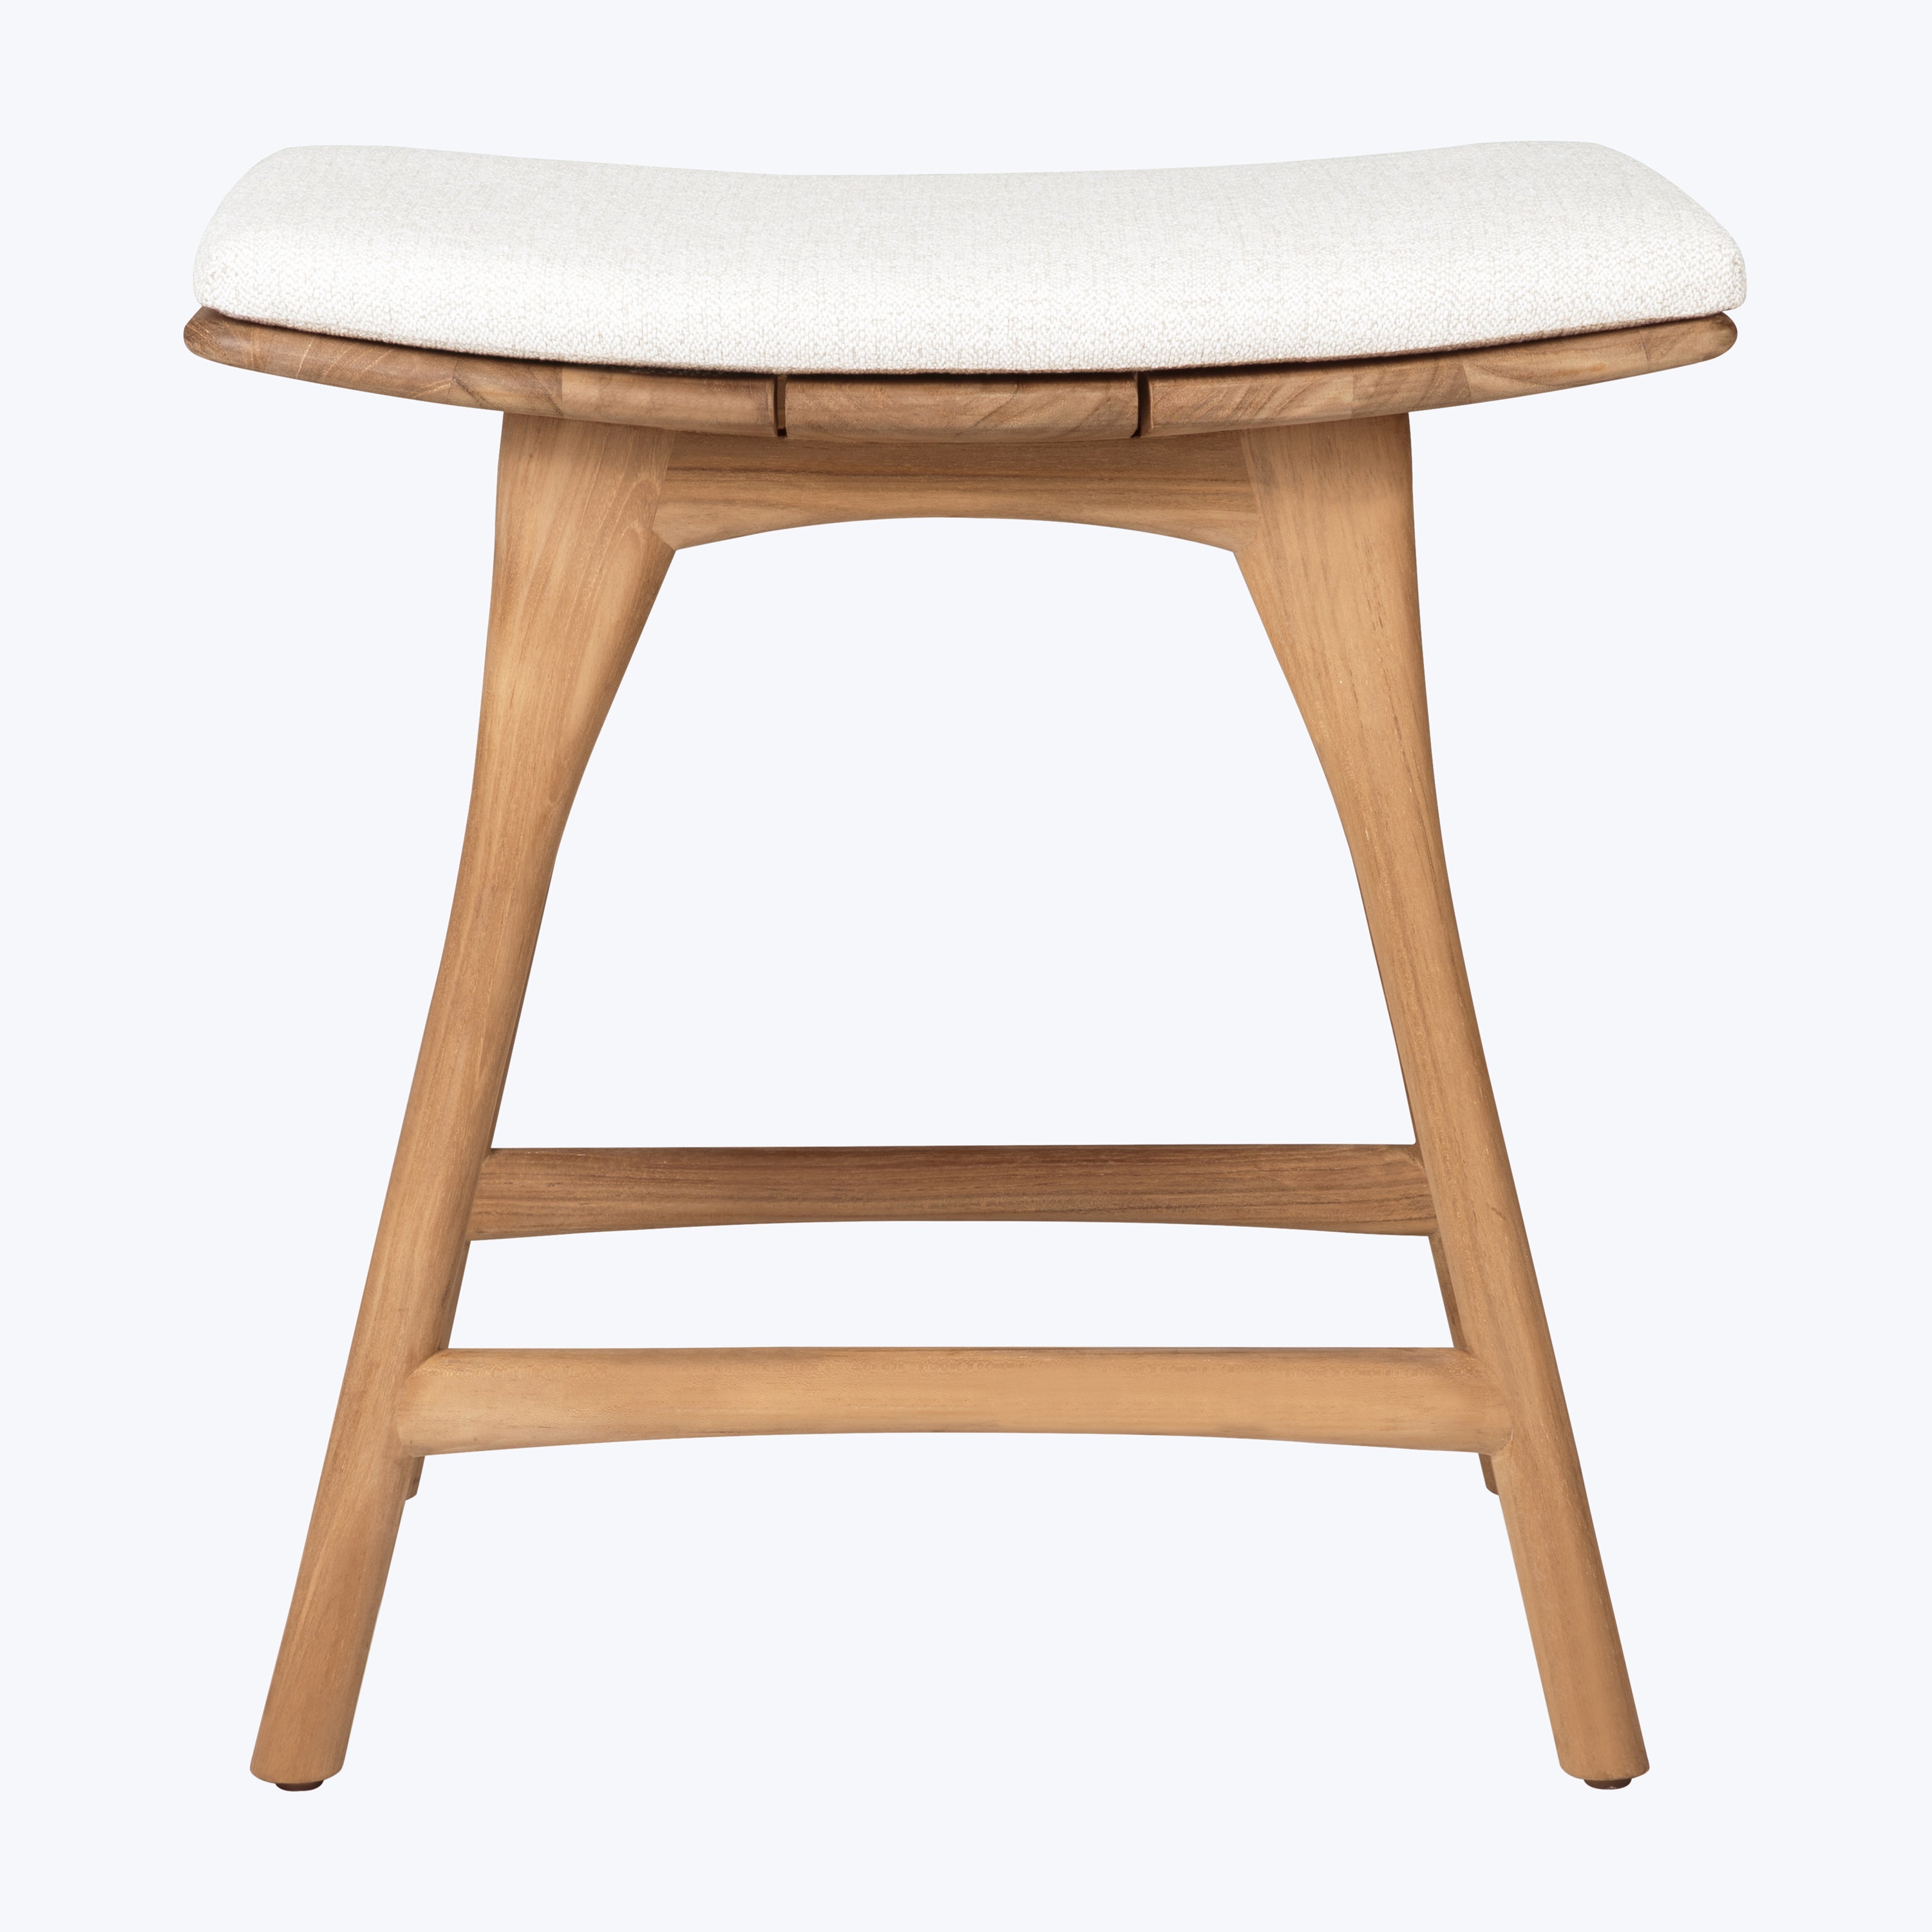 Osso Outdoor Upholstered Stool